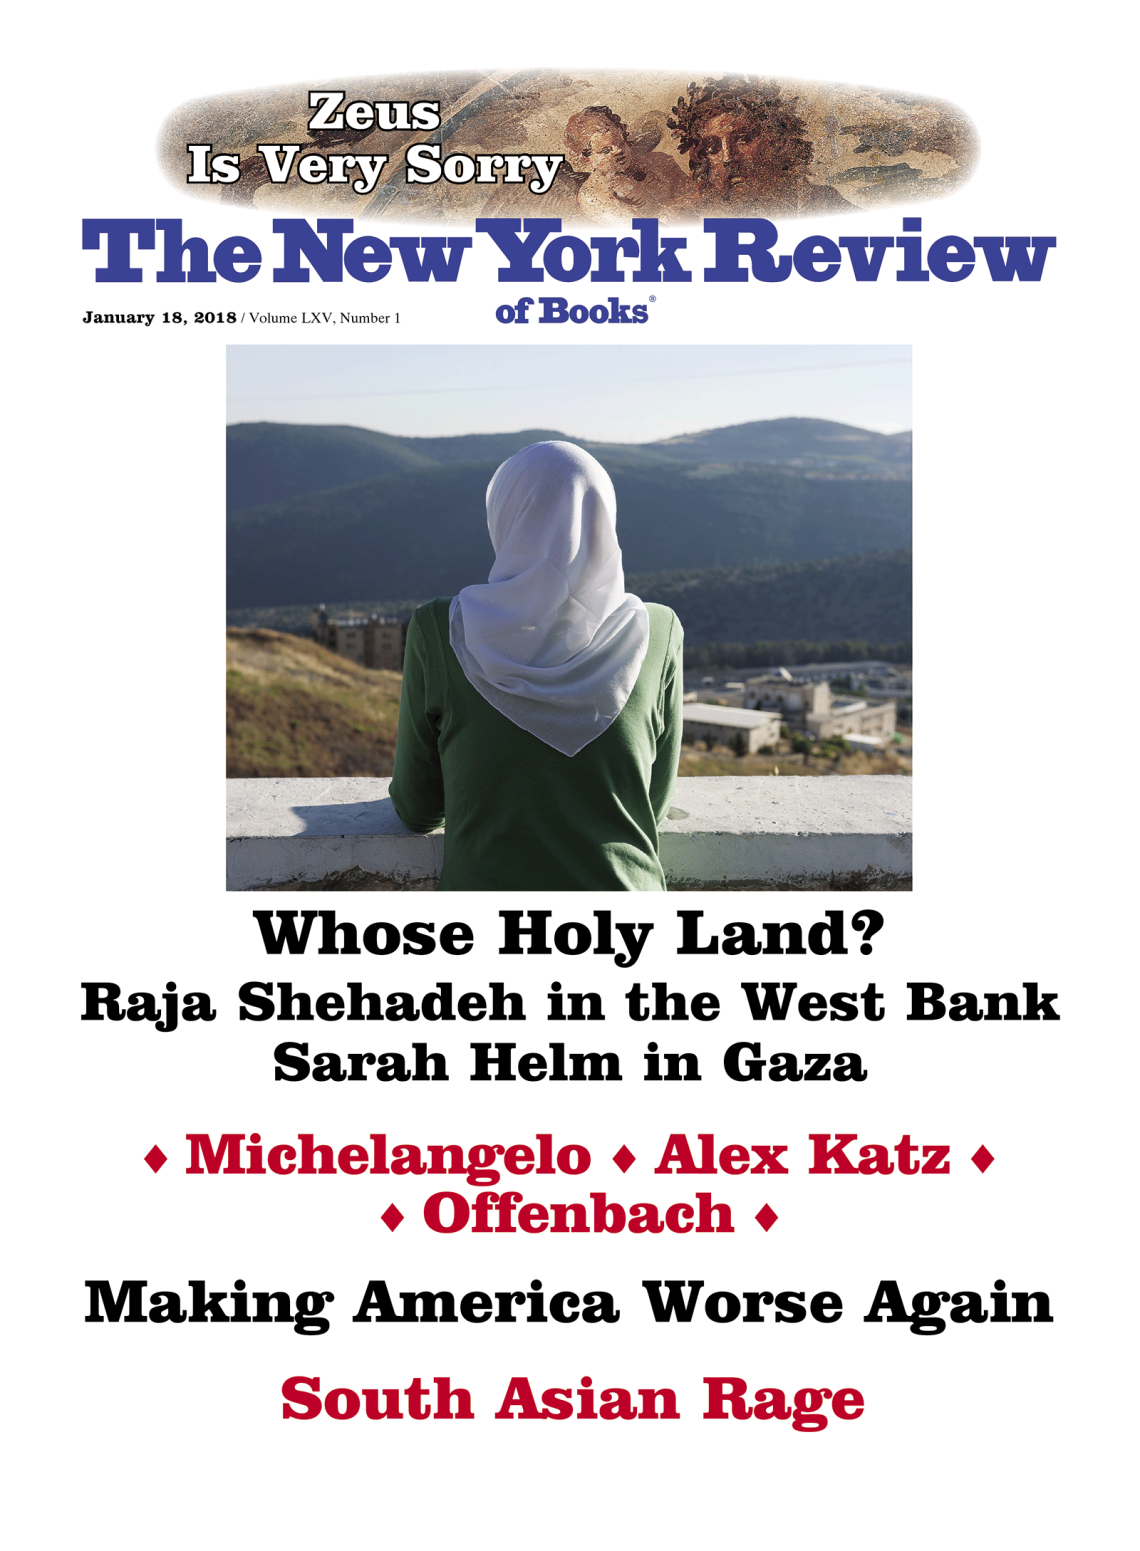 Image of the January 18, 2018 issue cover.